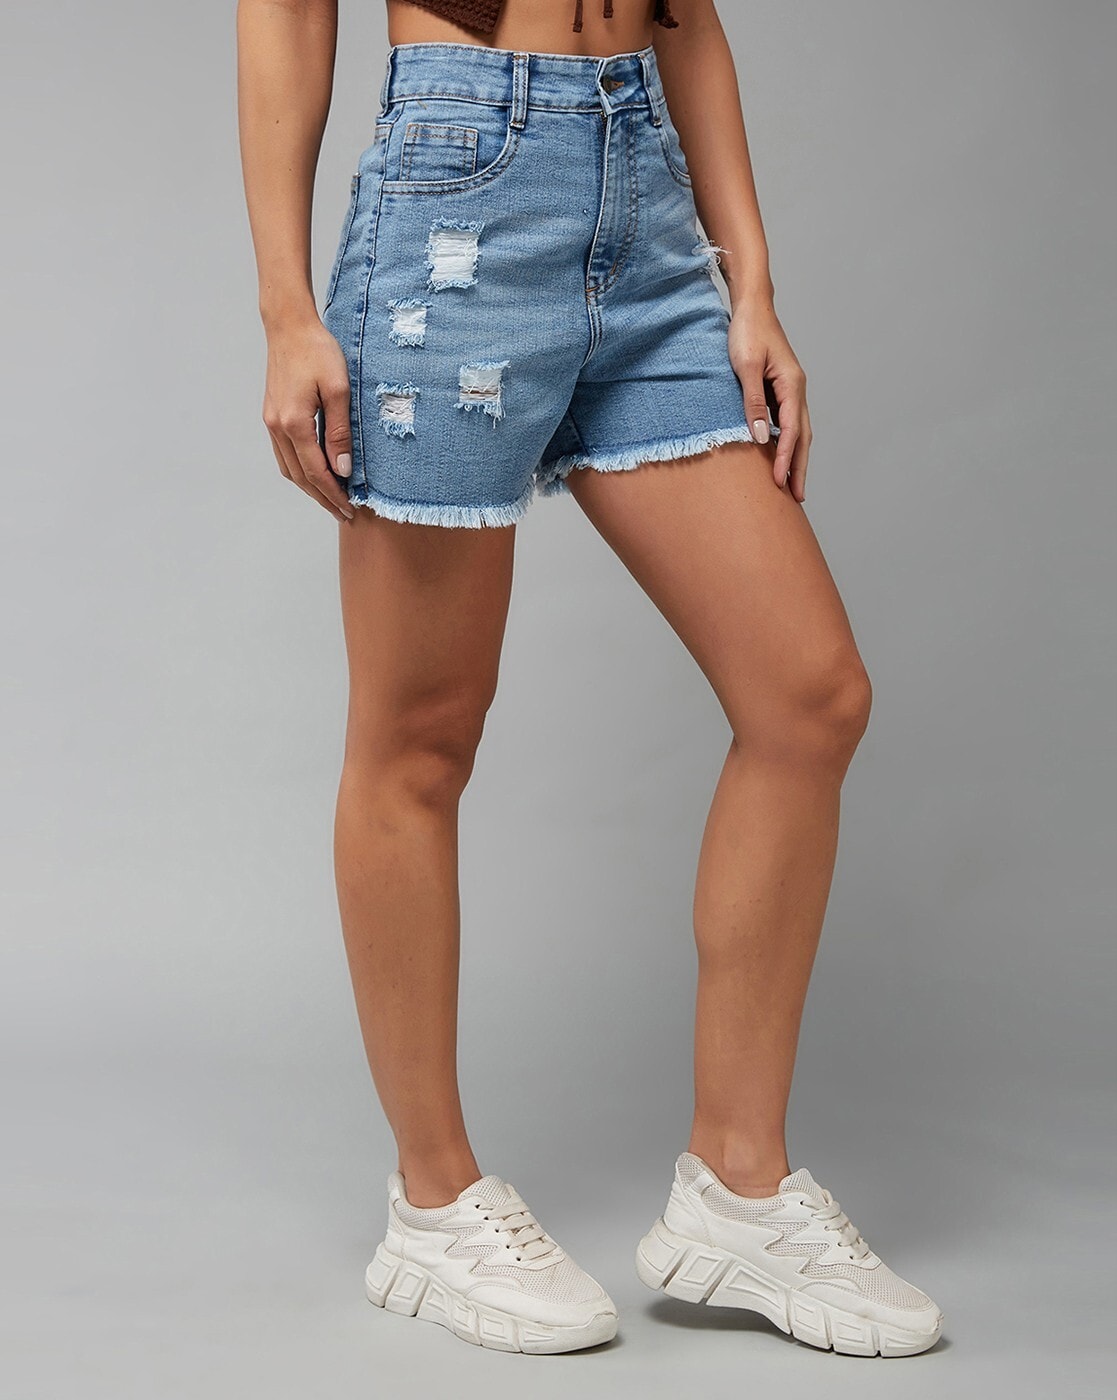 Buy Blue Shorts for Women by MISS CHASE Online